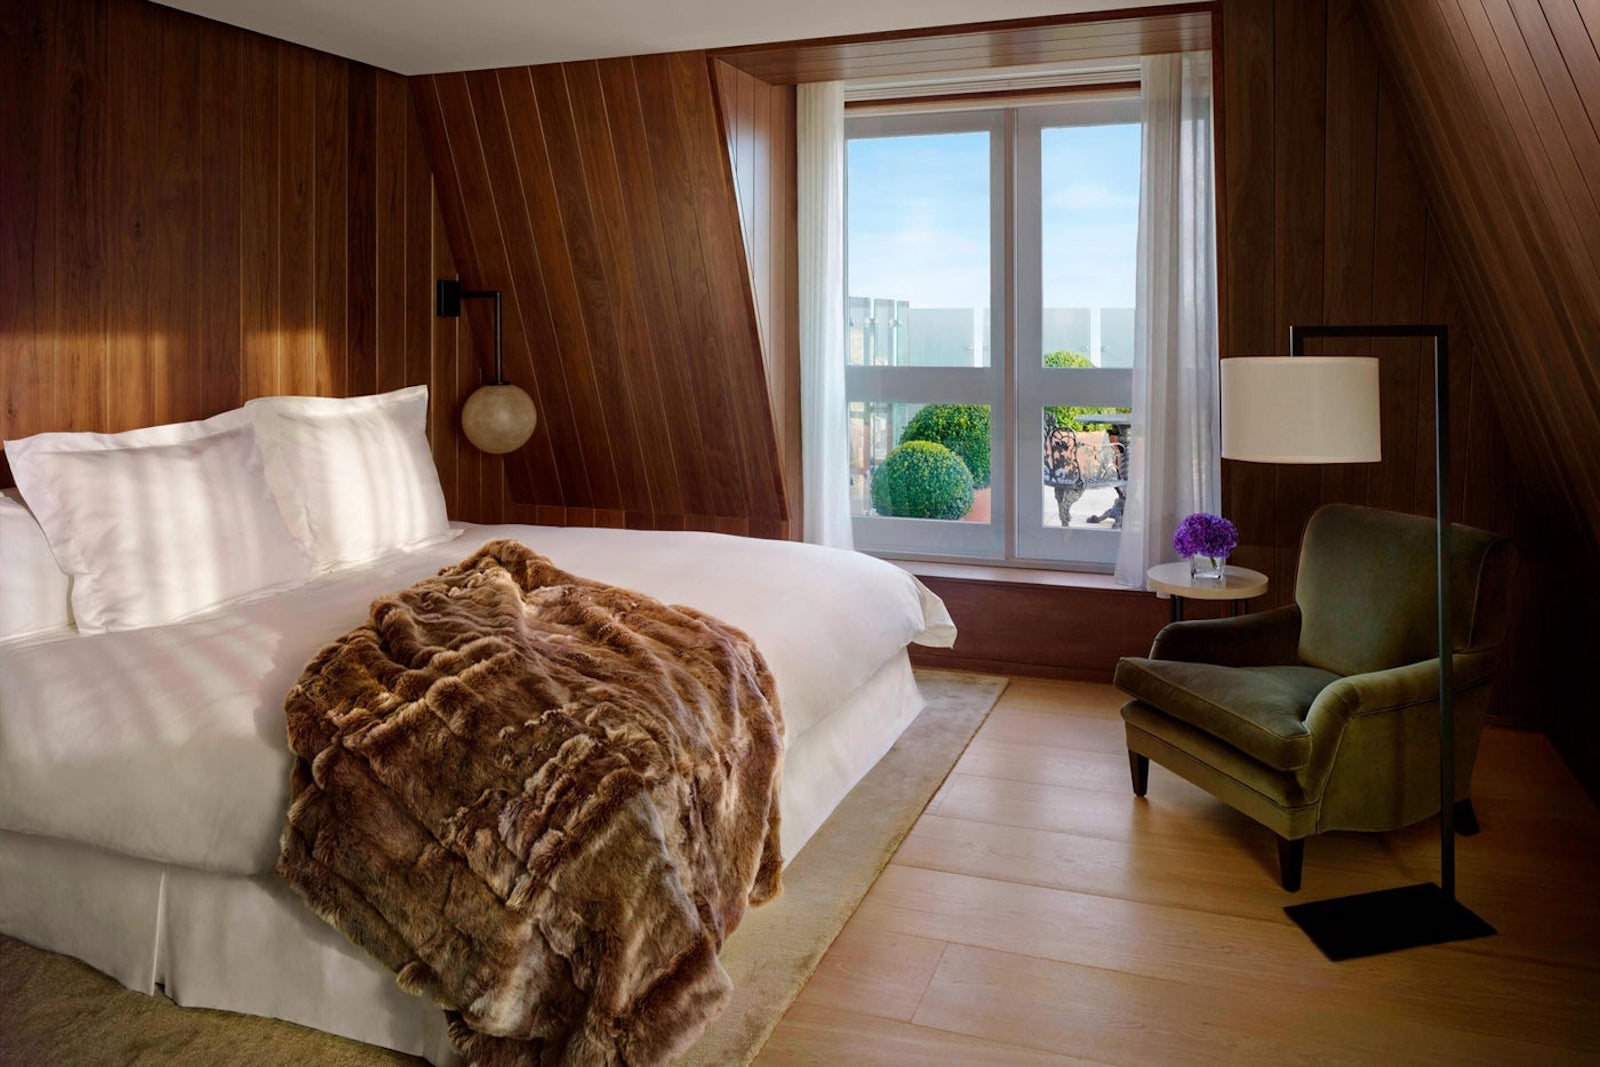 hotel room with white bed, fur blanket, wooden paneled walls and window looking out at trees